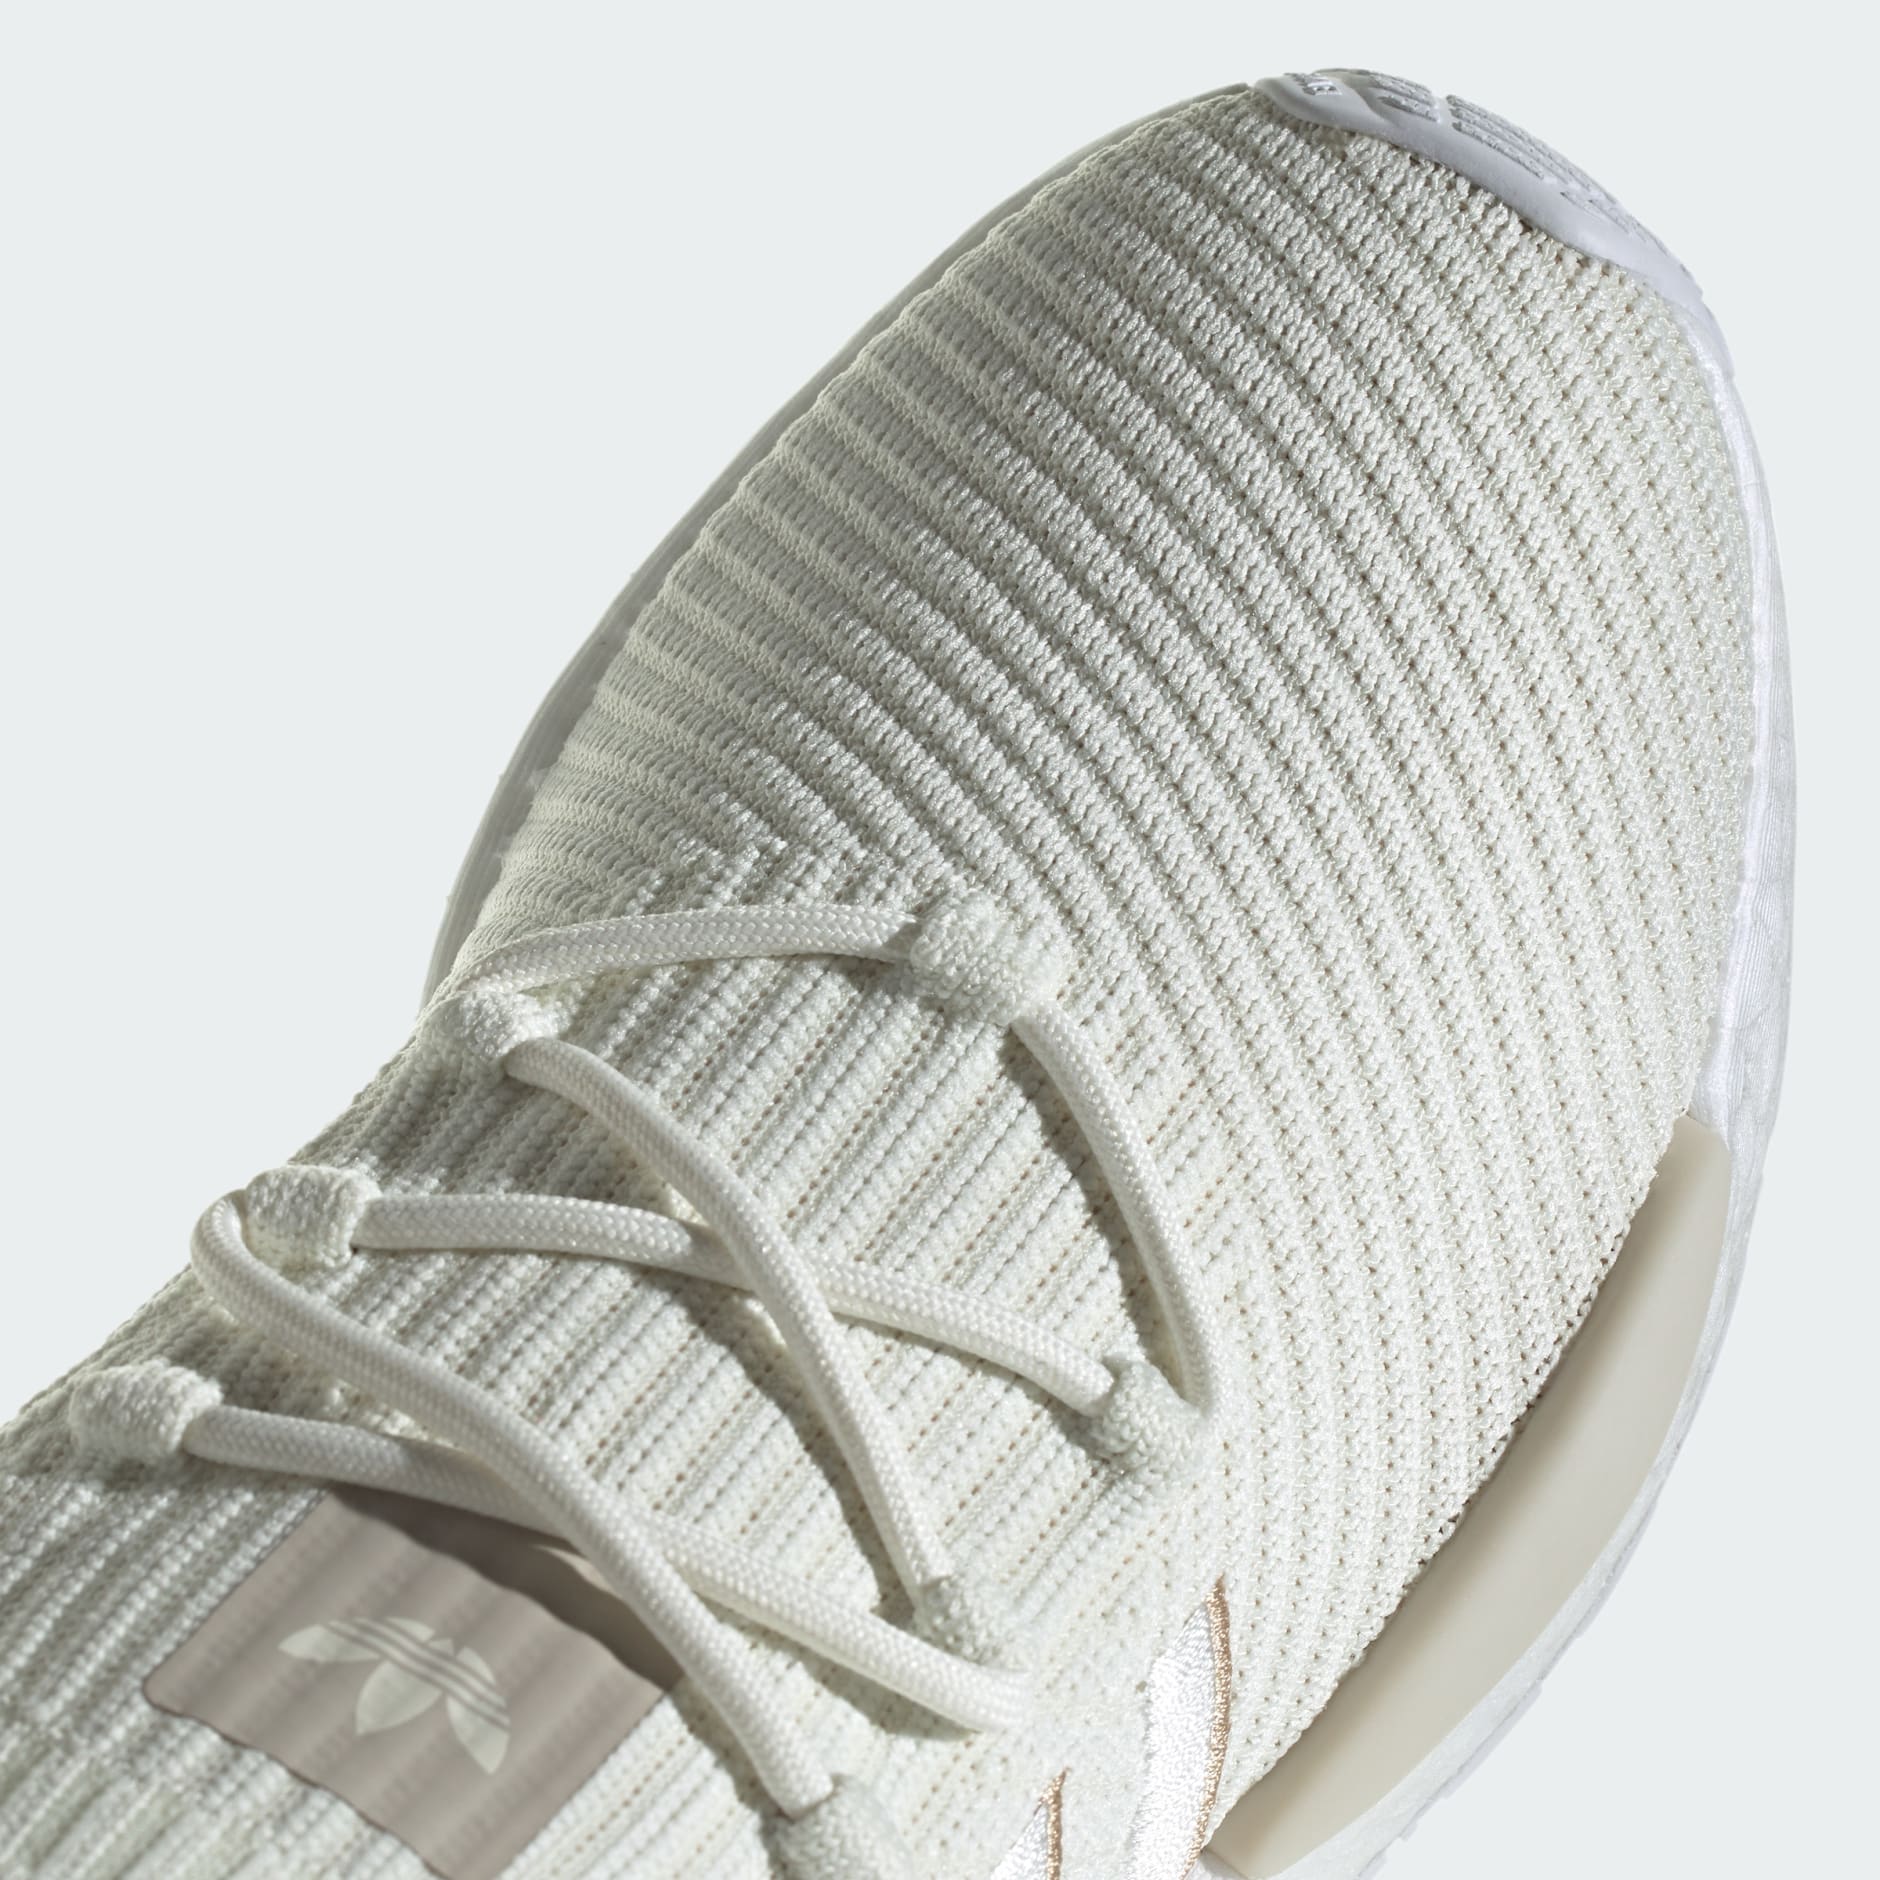 Shoes - NMD_W1 Shoes - White | adidas South Africa